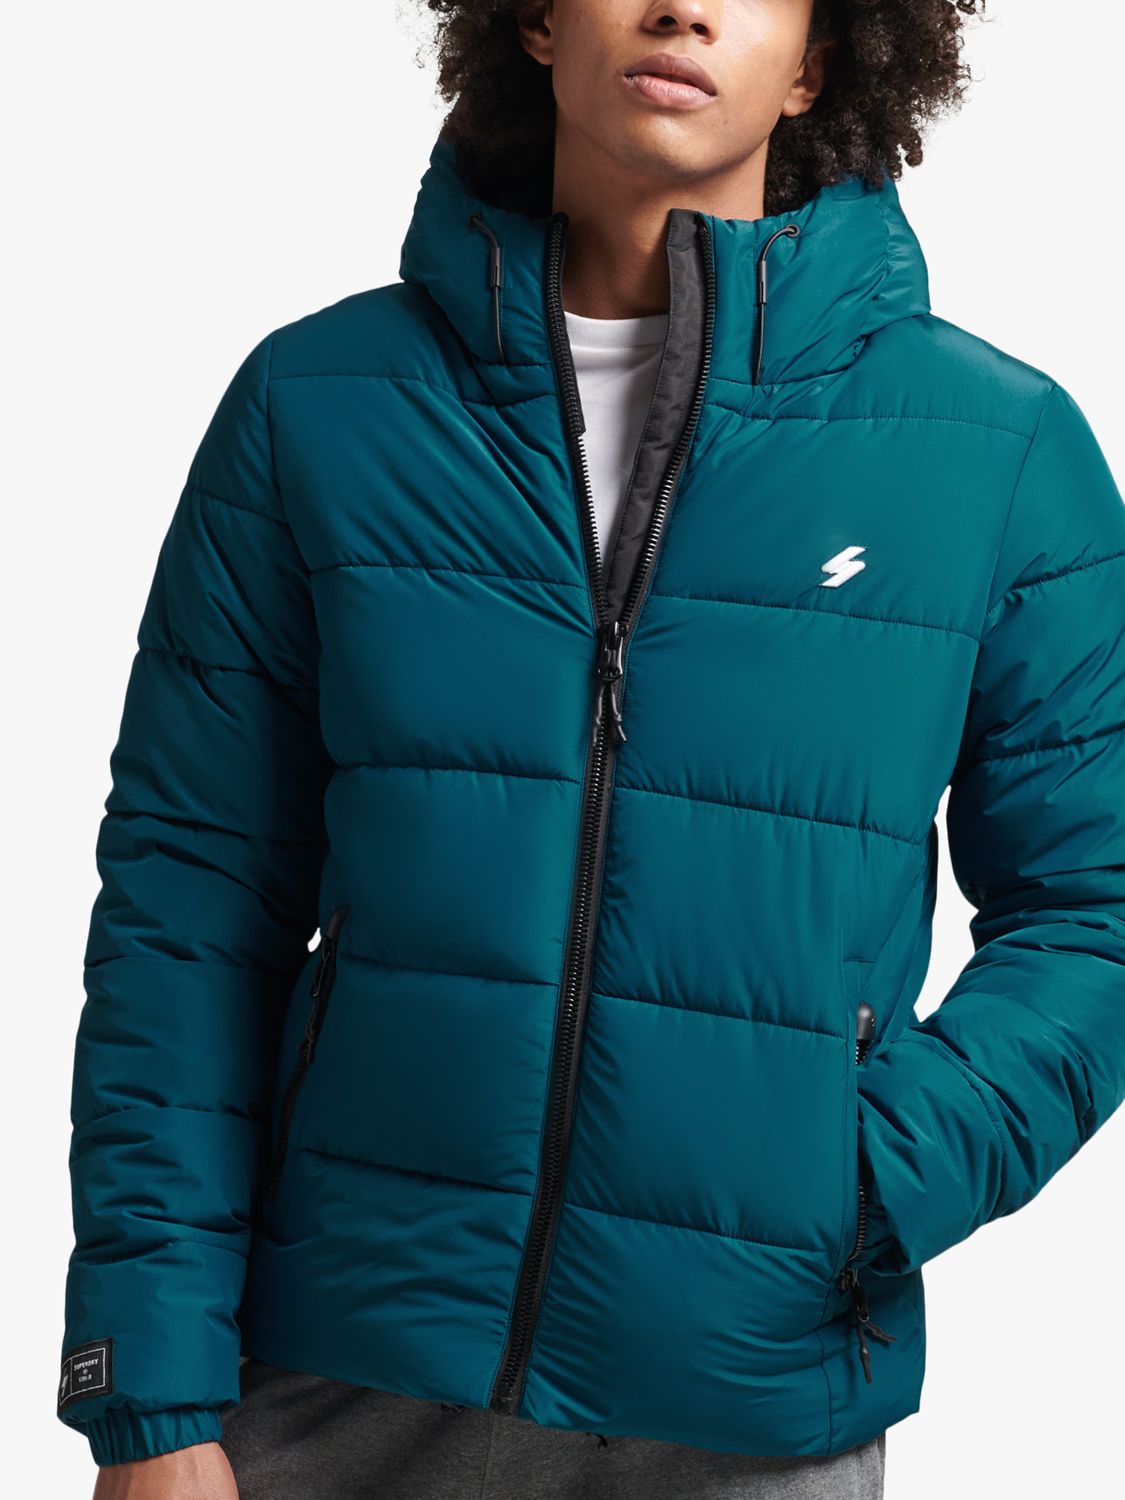 Superdry Hooded Sports Puffer Jacket, Sailor Blue at John Lewis & Partners